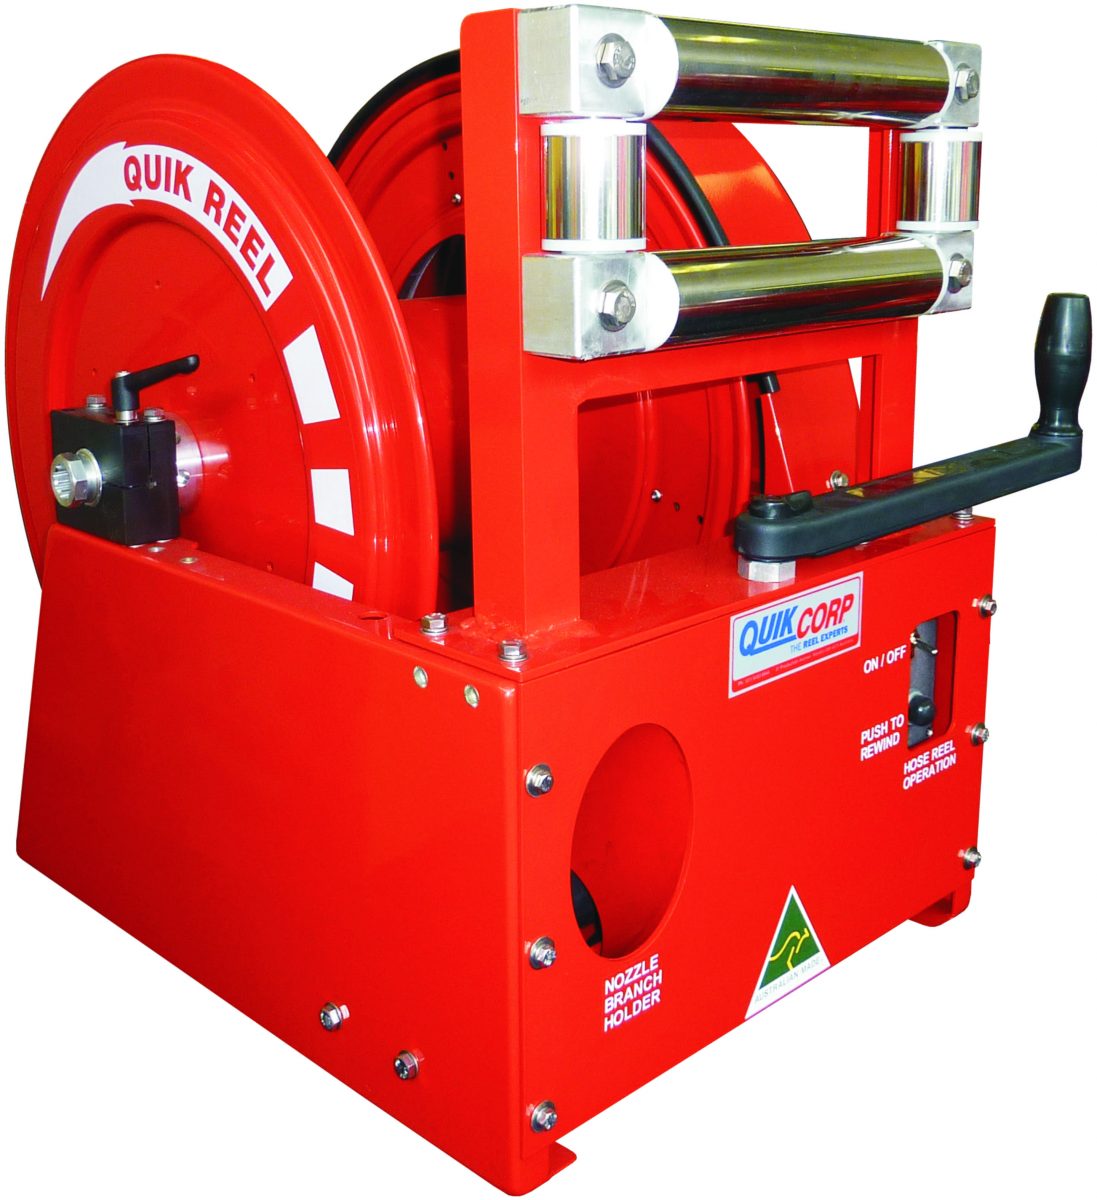 Quikcorp Powered Hose Reel – RFR2